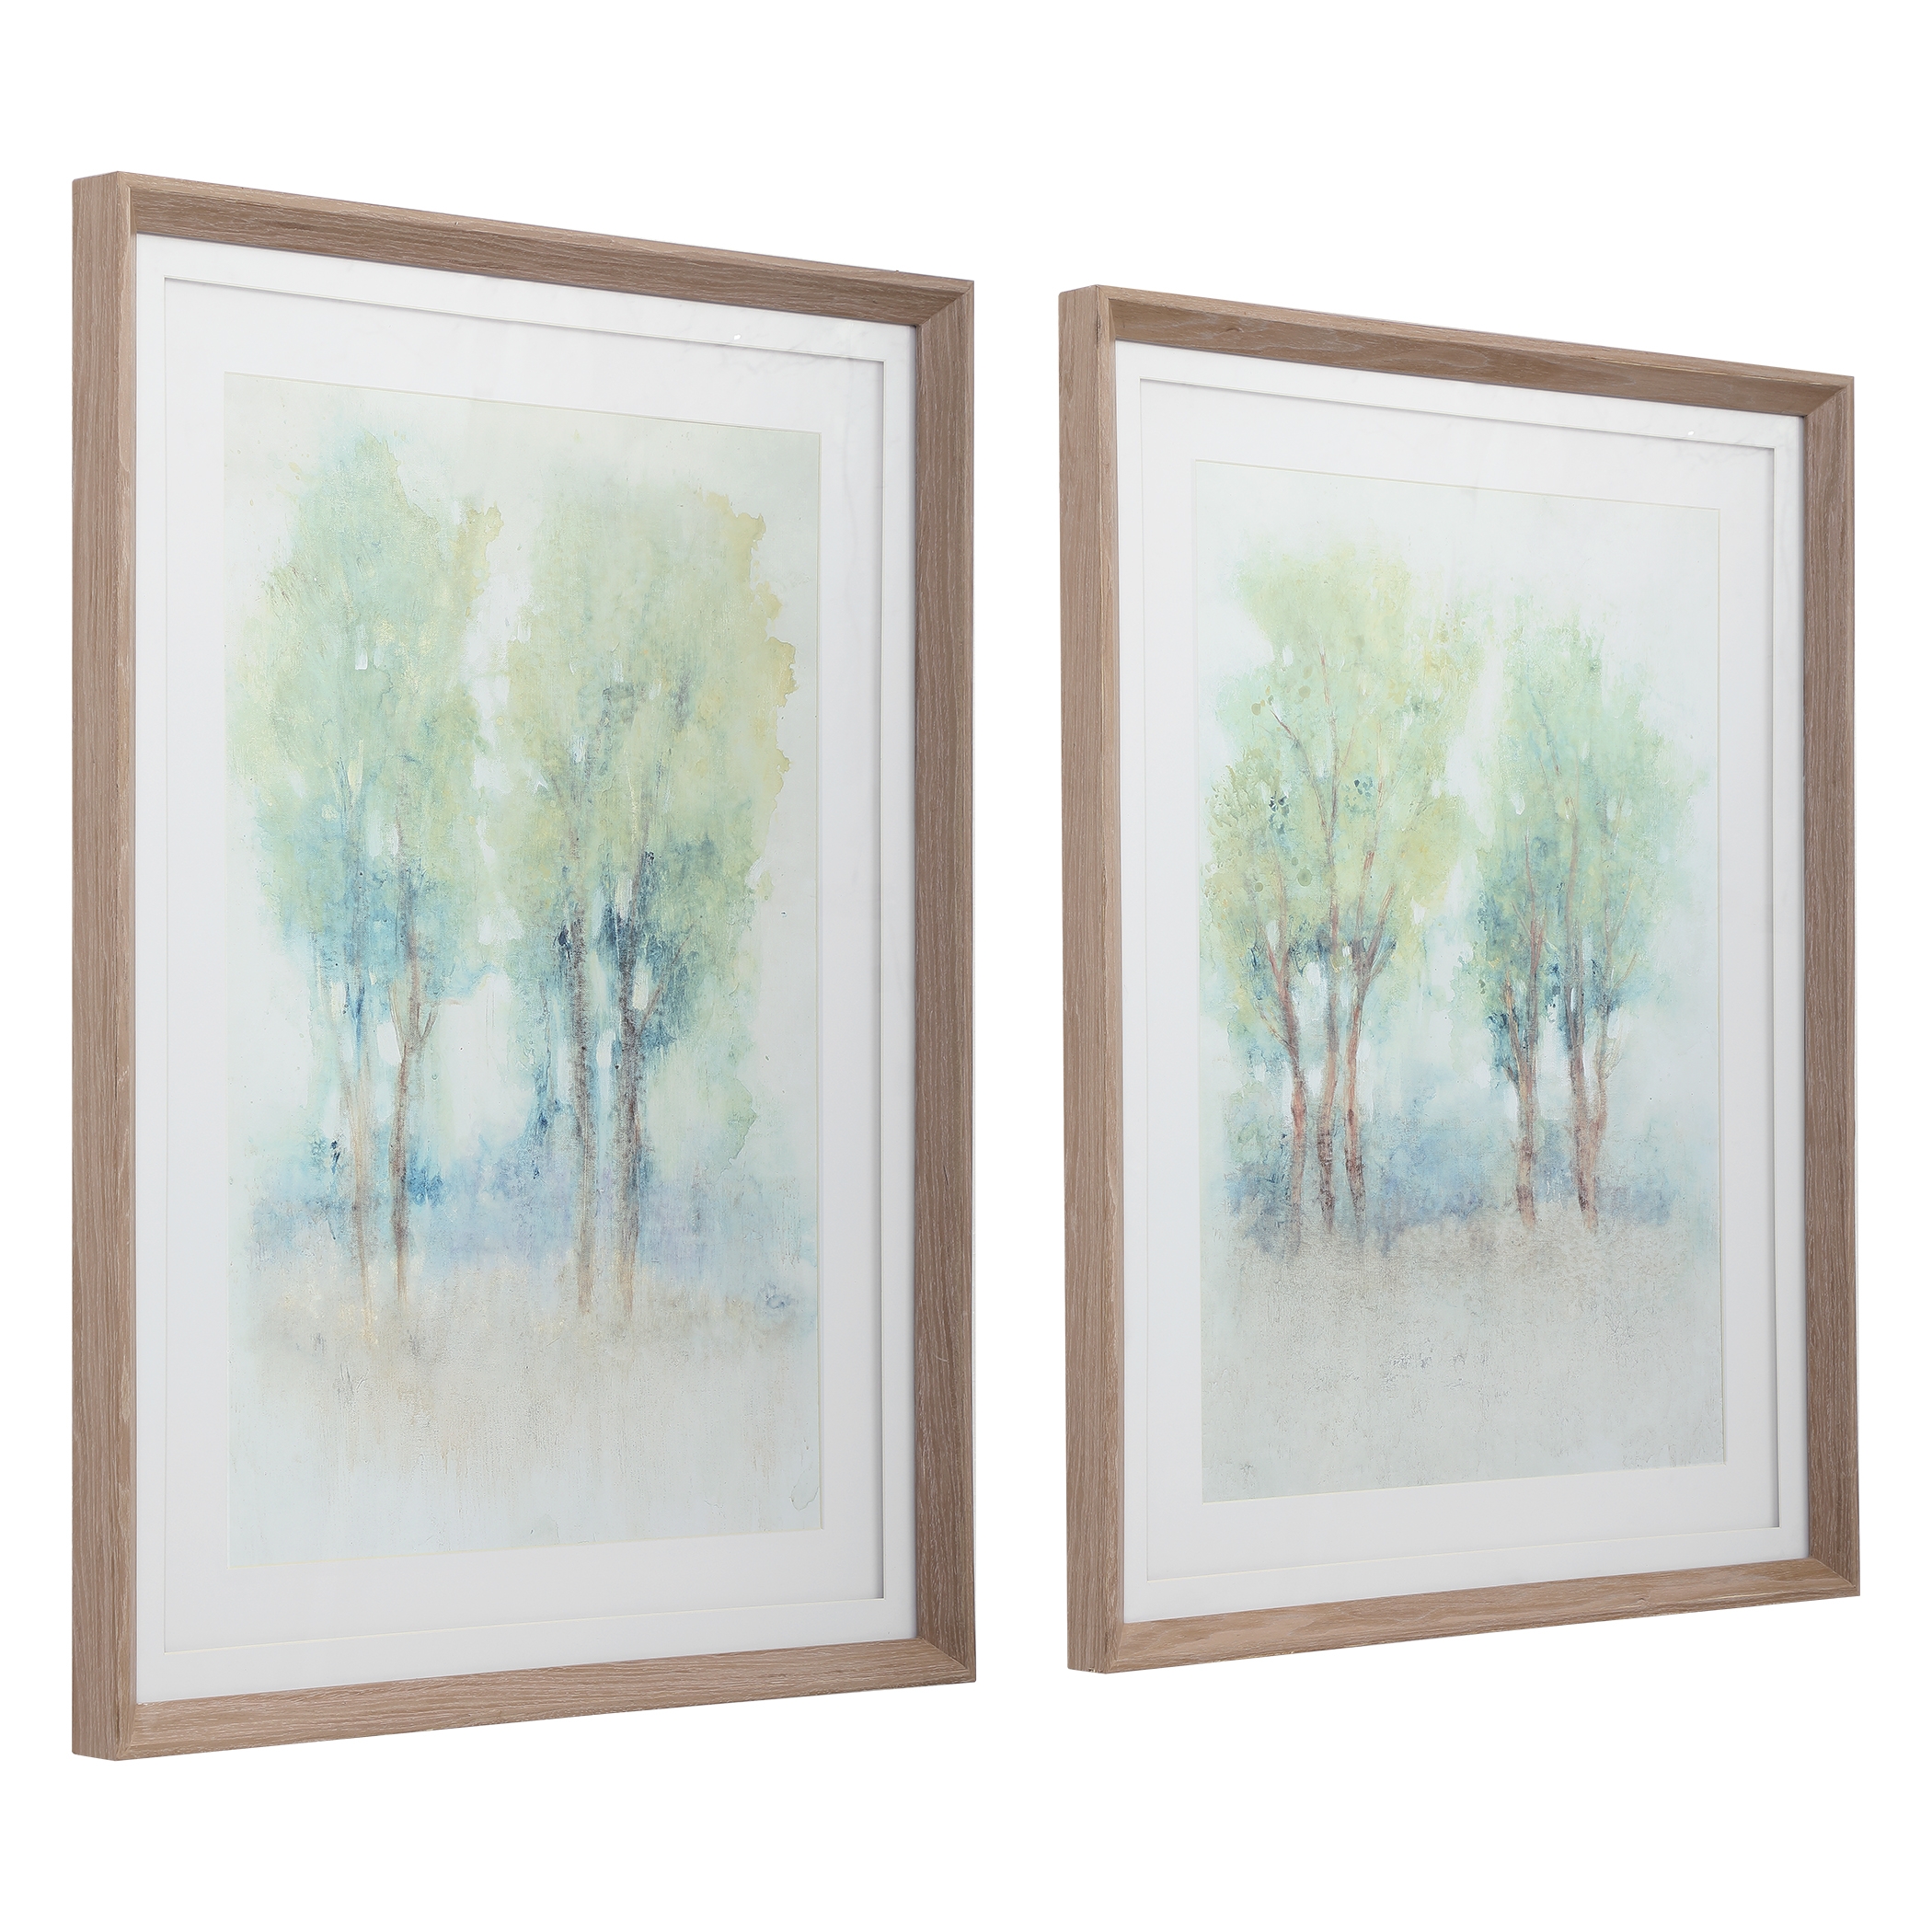 Meadow View Framed Prints, S/2 - Image 0